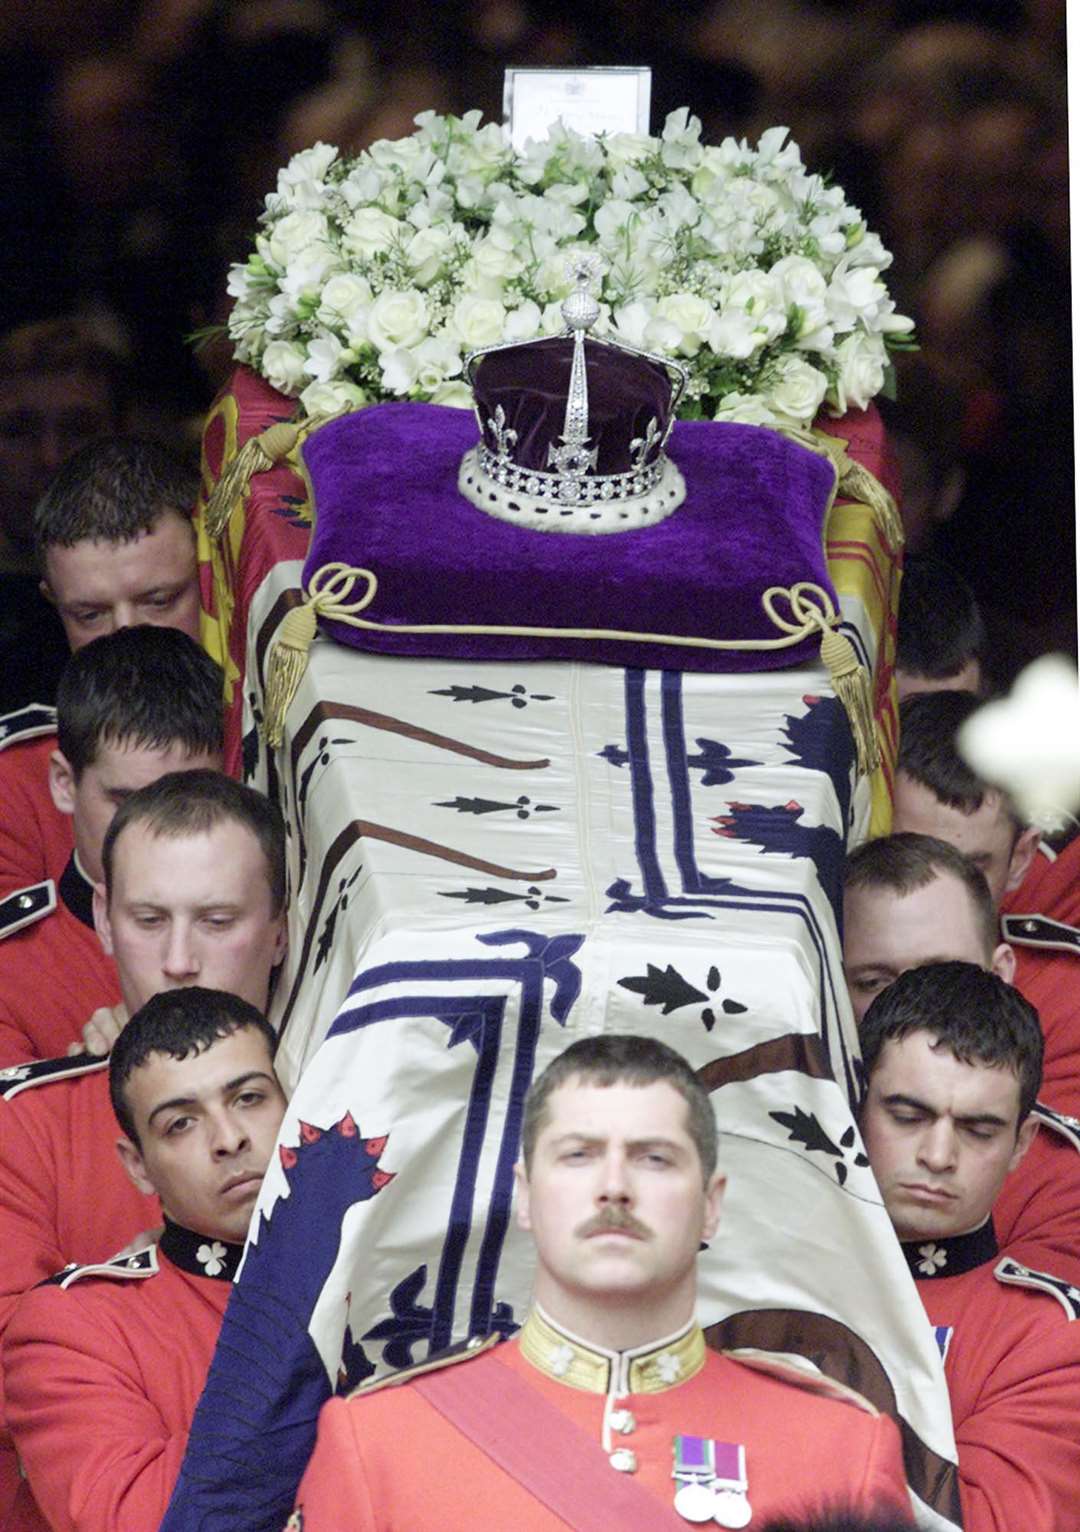 The Queen Mother’s coffin was wrapped in her personal standard, with a wreath of flowers and her coronation crown placed on top (PA)